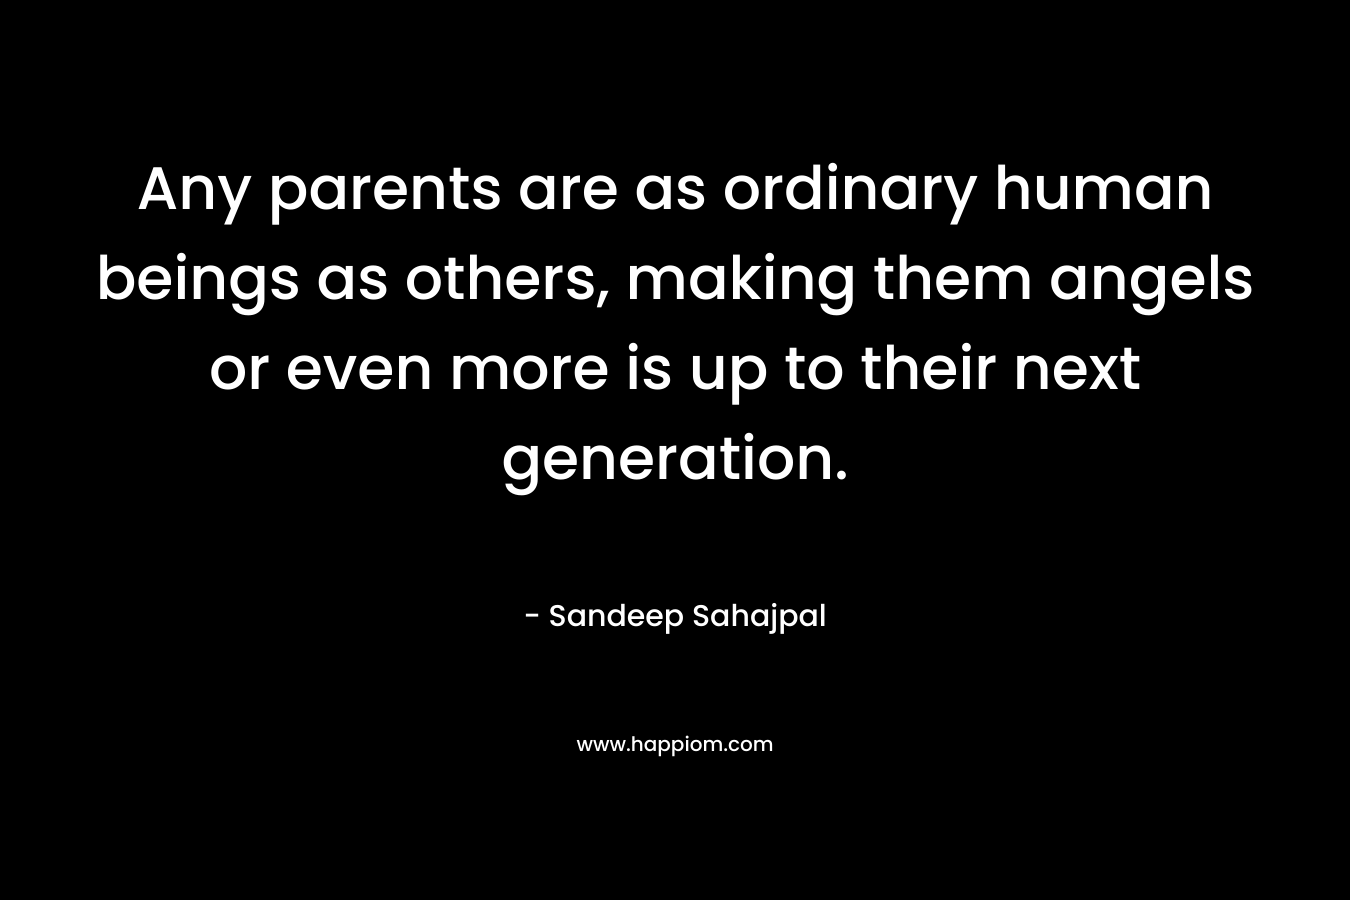 Any parents are as ordinary human beings as others, making them angels or even more is up to their next generation. – Sandeep Sahajpal